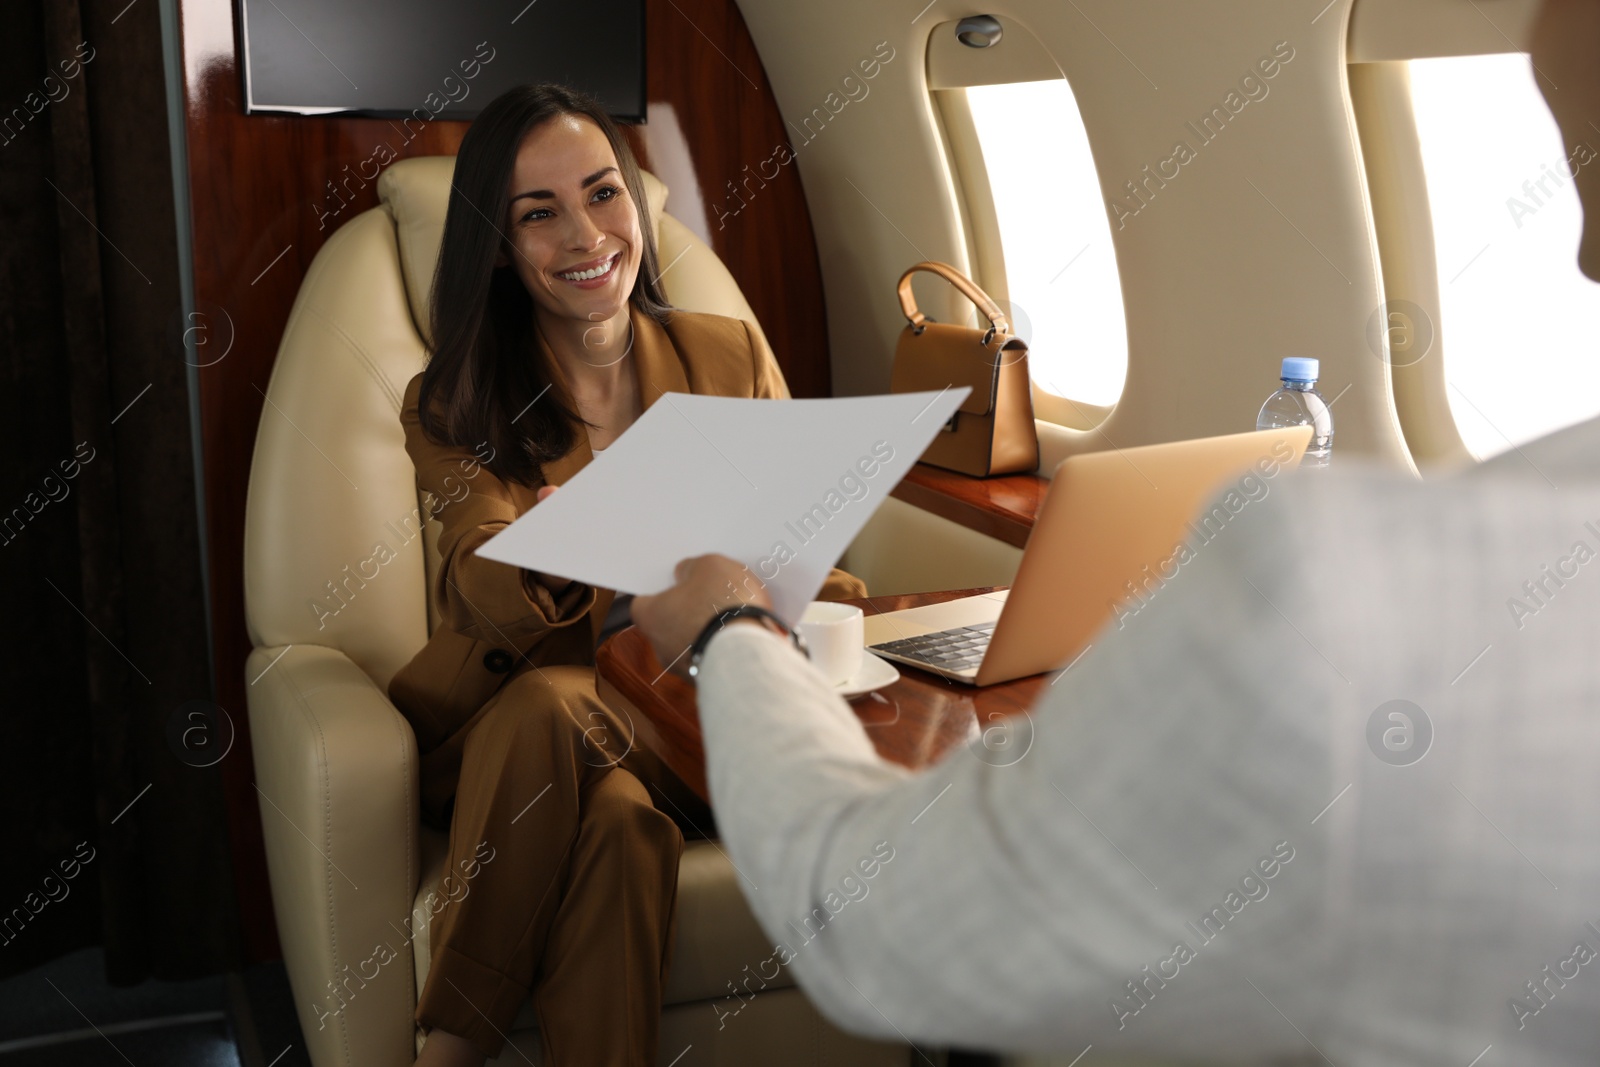 Photo of Man giving documents to woman in airplane during flight